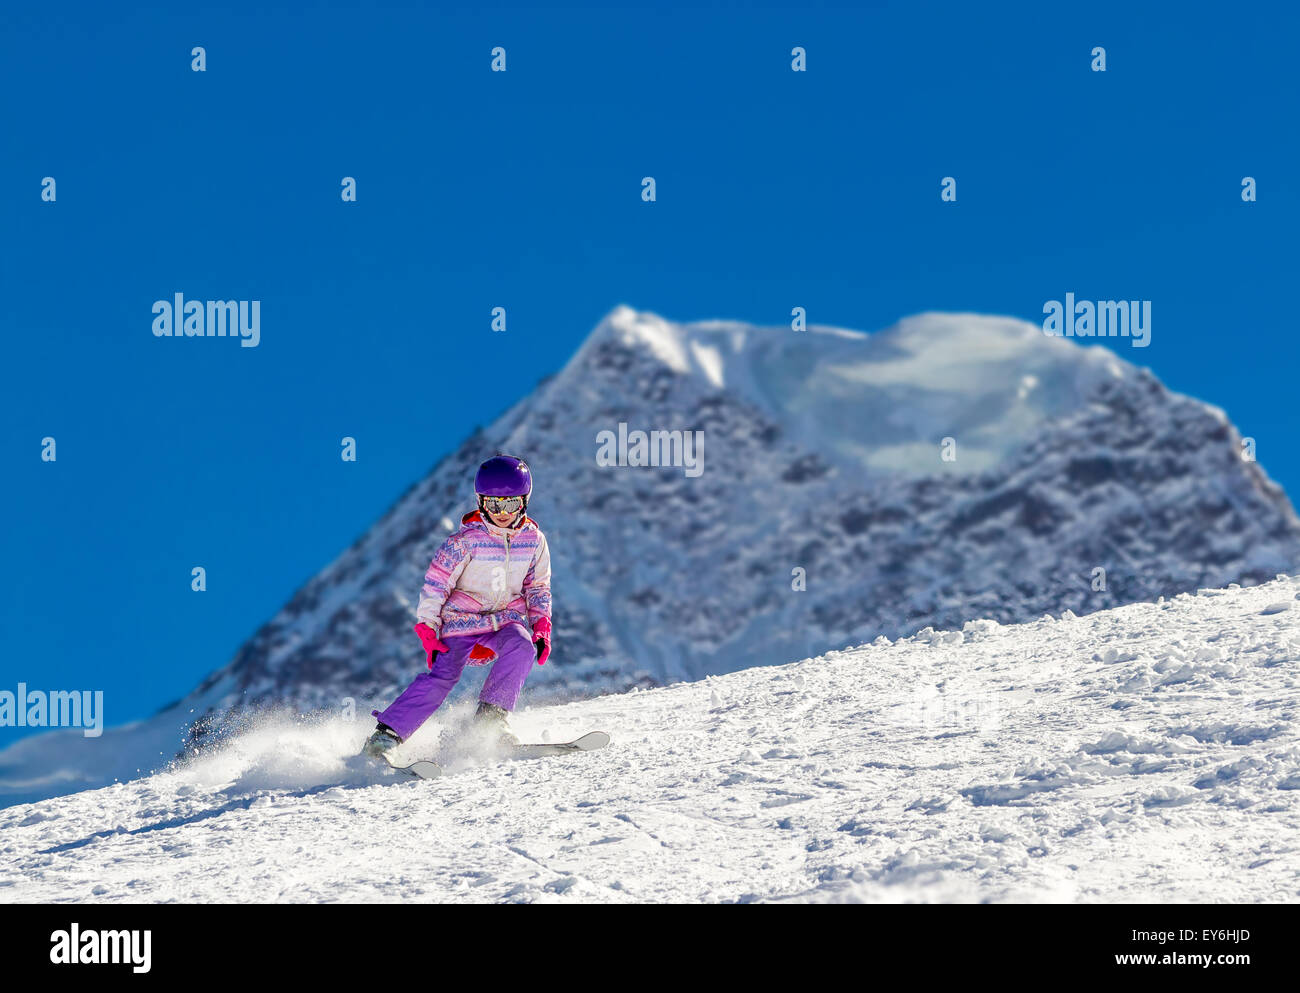 Little skier in high mountains. Against the background of high mountains covered with ice Stock Photo